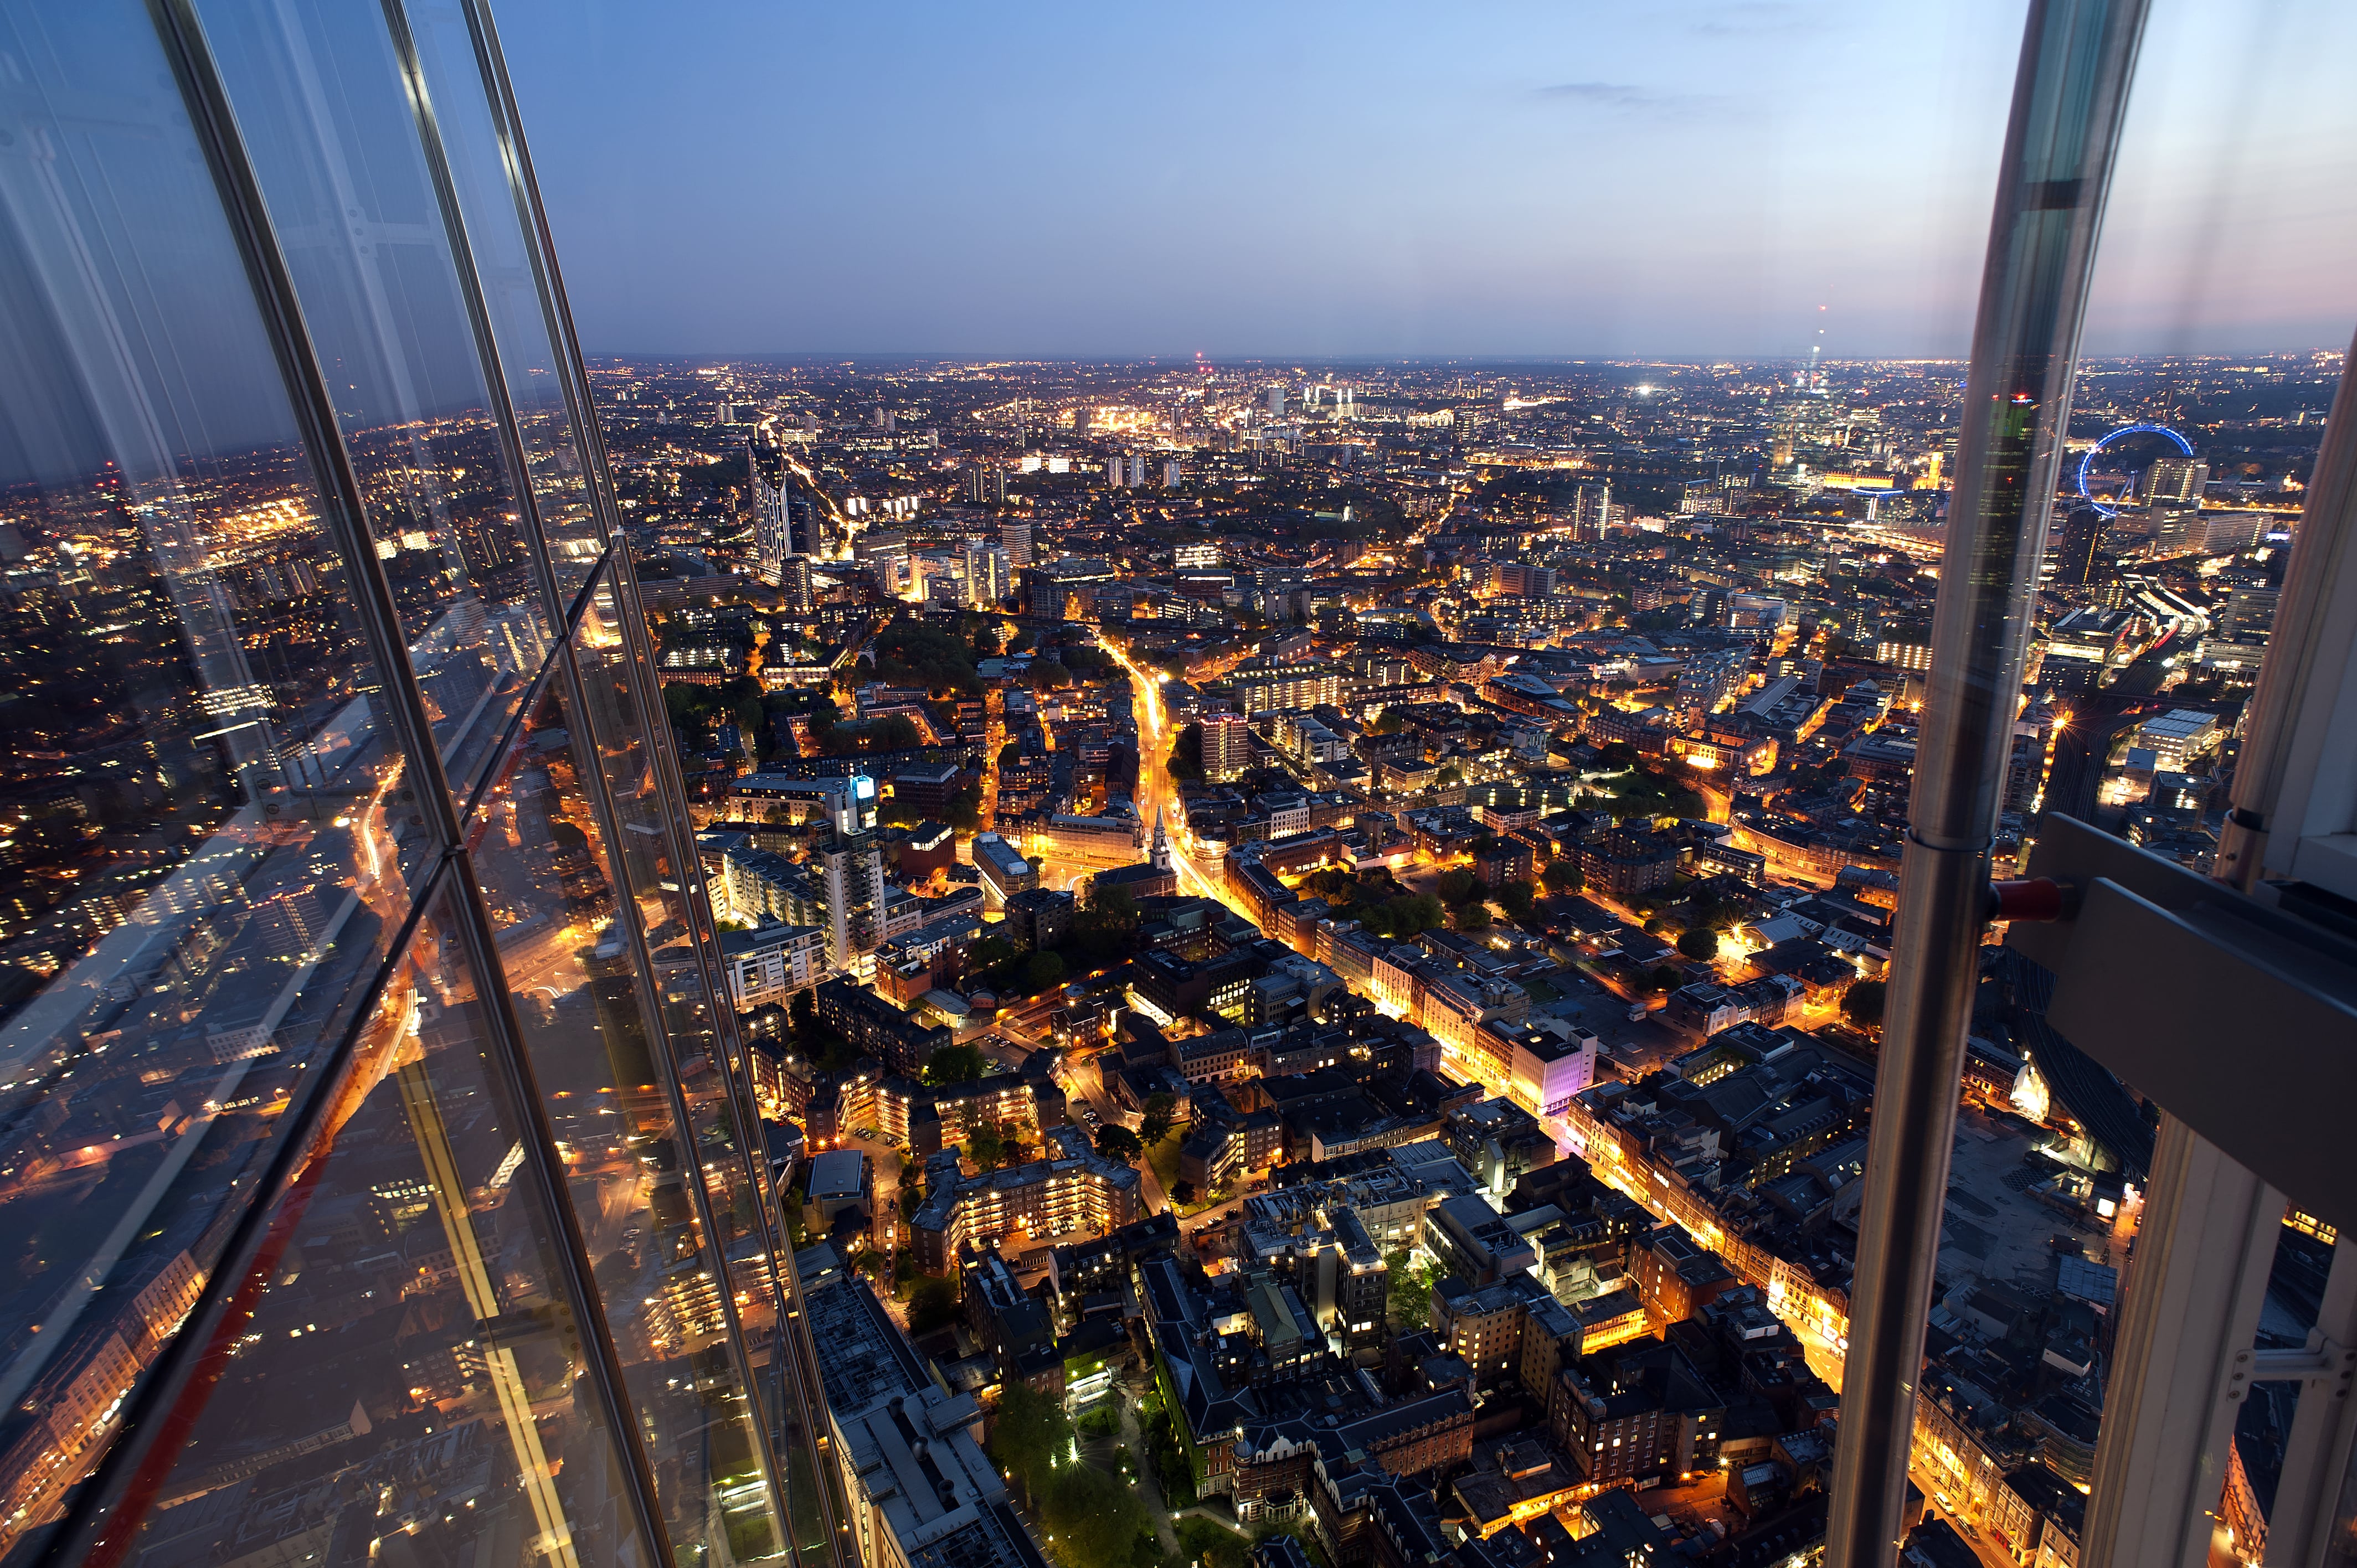 View of South London from The Shard at night